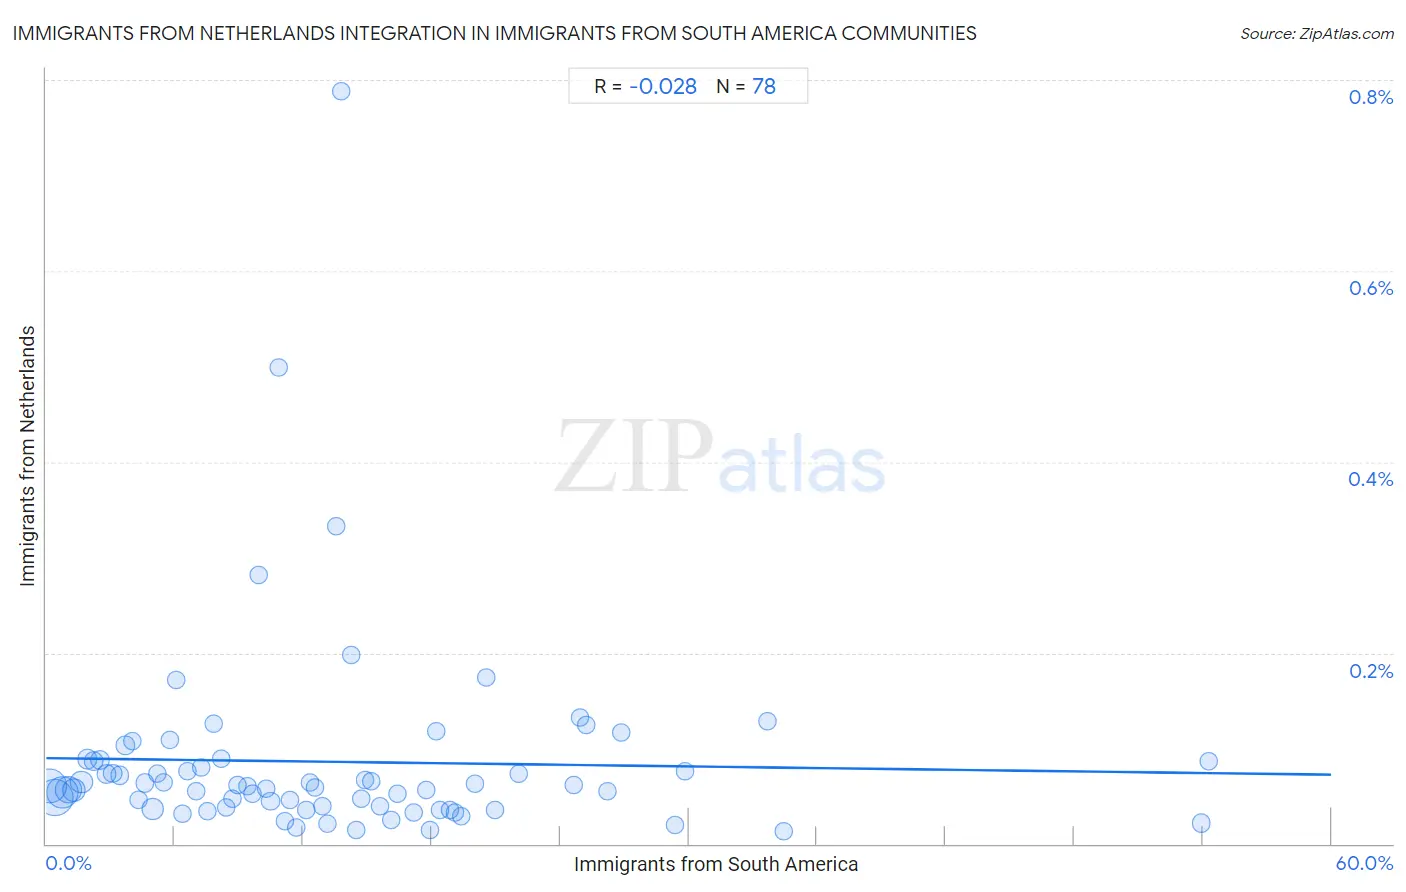 Immigrants from South America Integration in Immigrants from Netherlands Communities